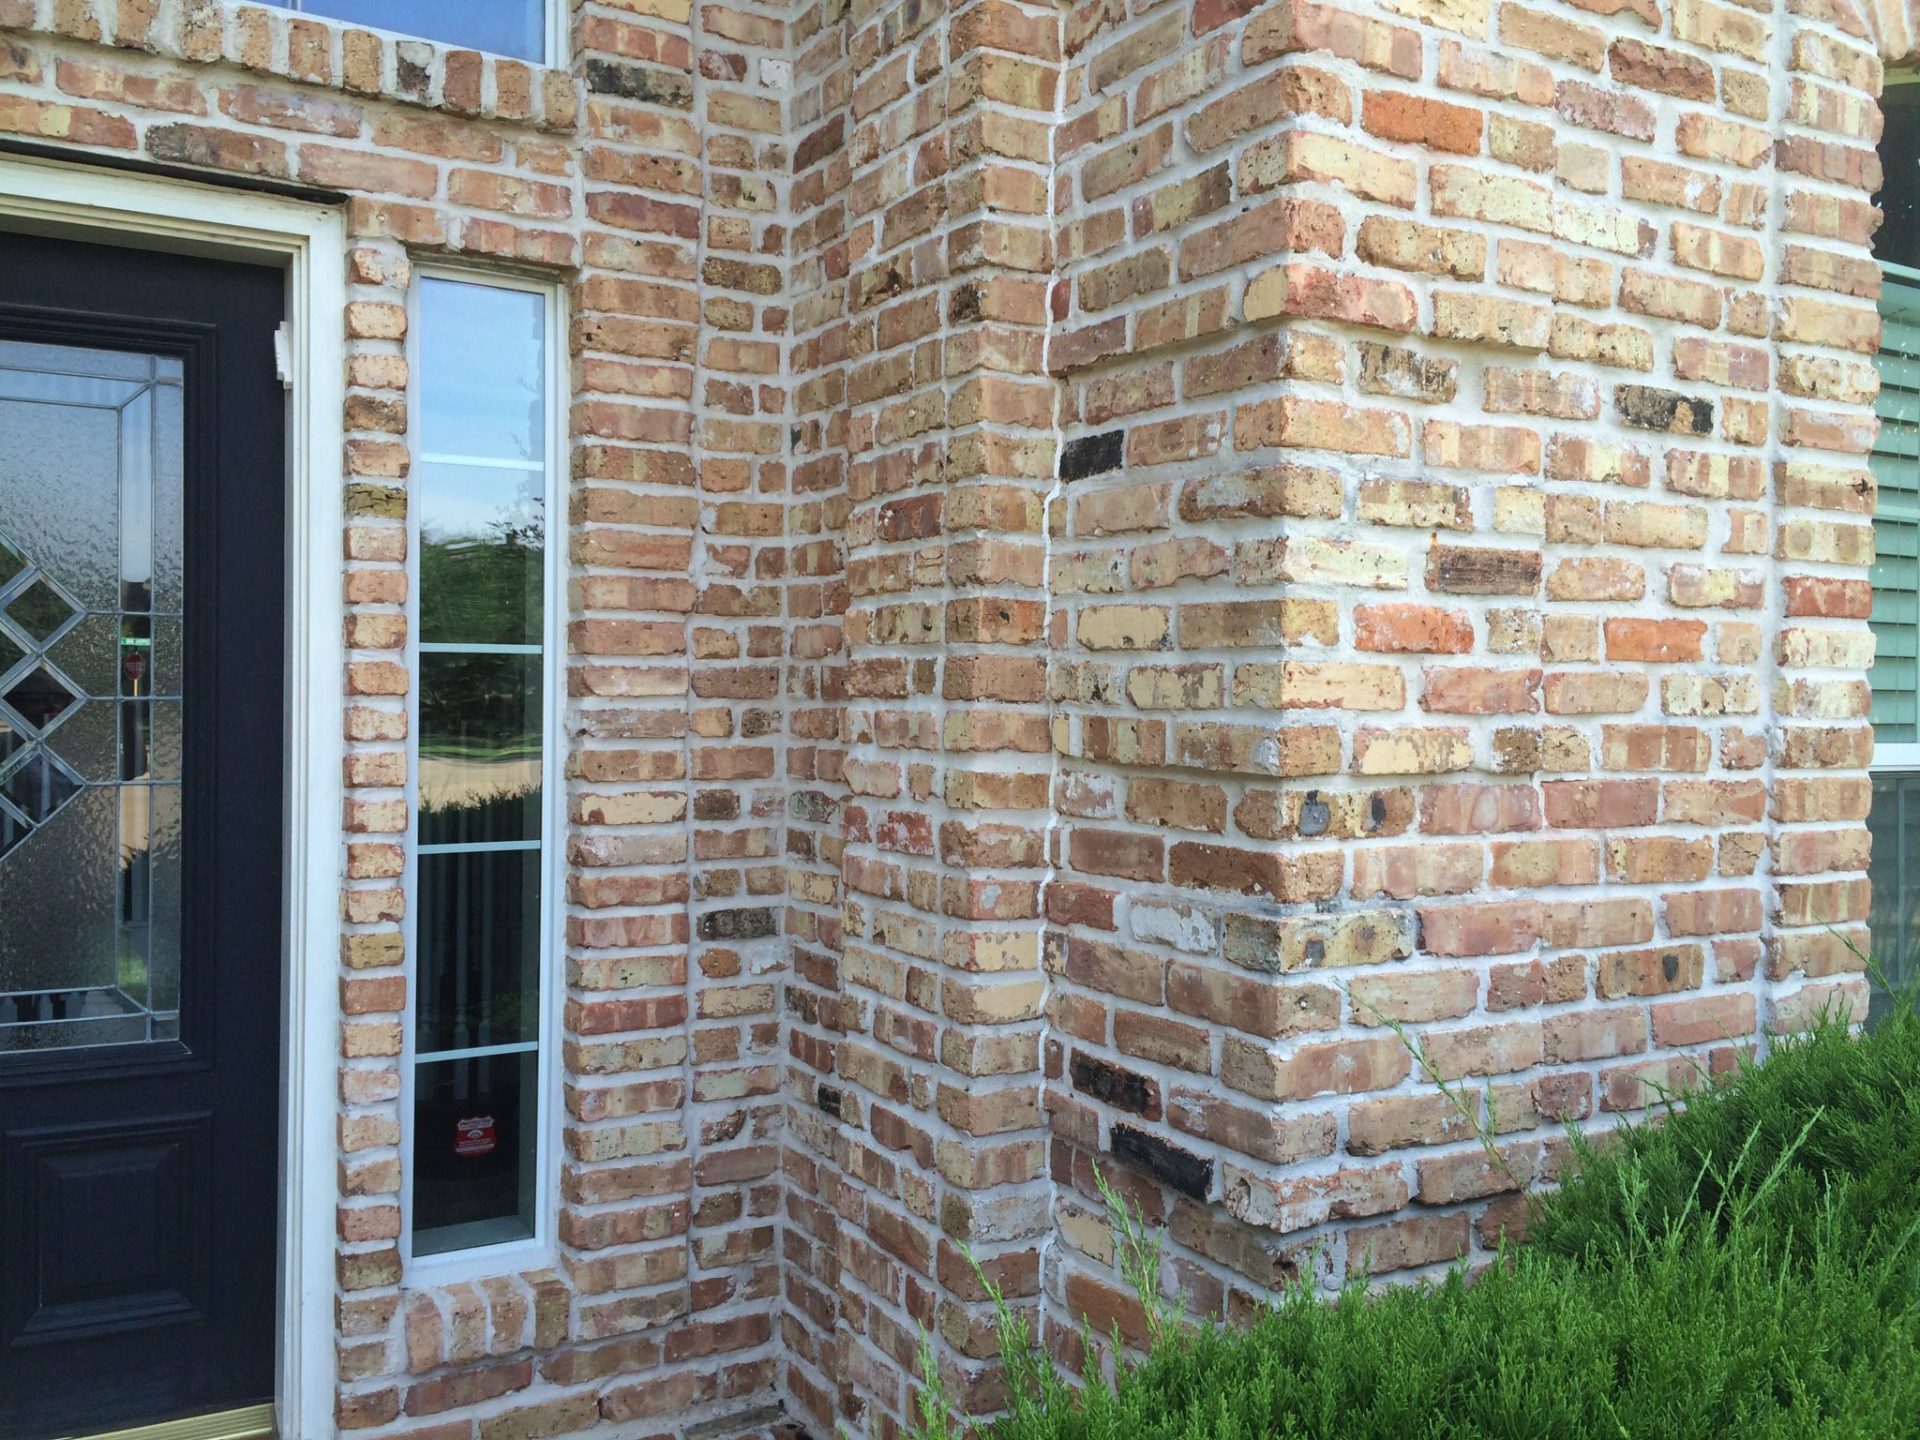 Tuck pointing & Masonry Contractors in Chicago for Commercial and Residential Projects